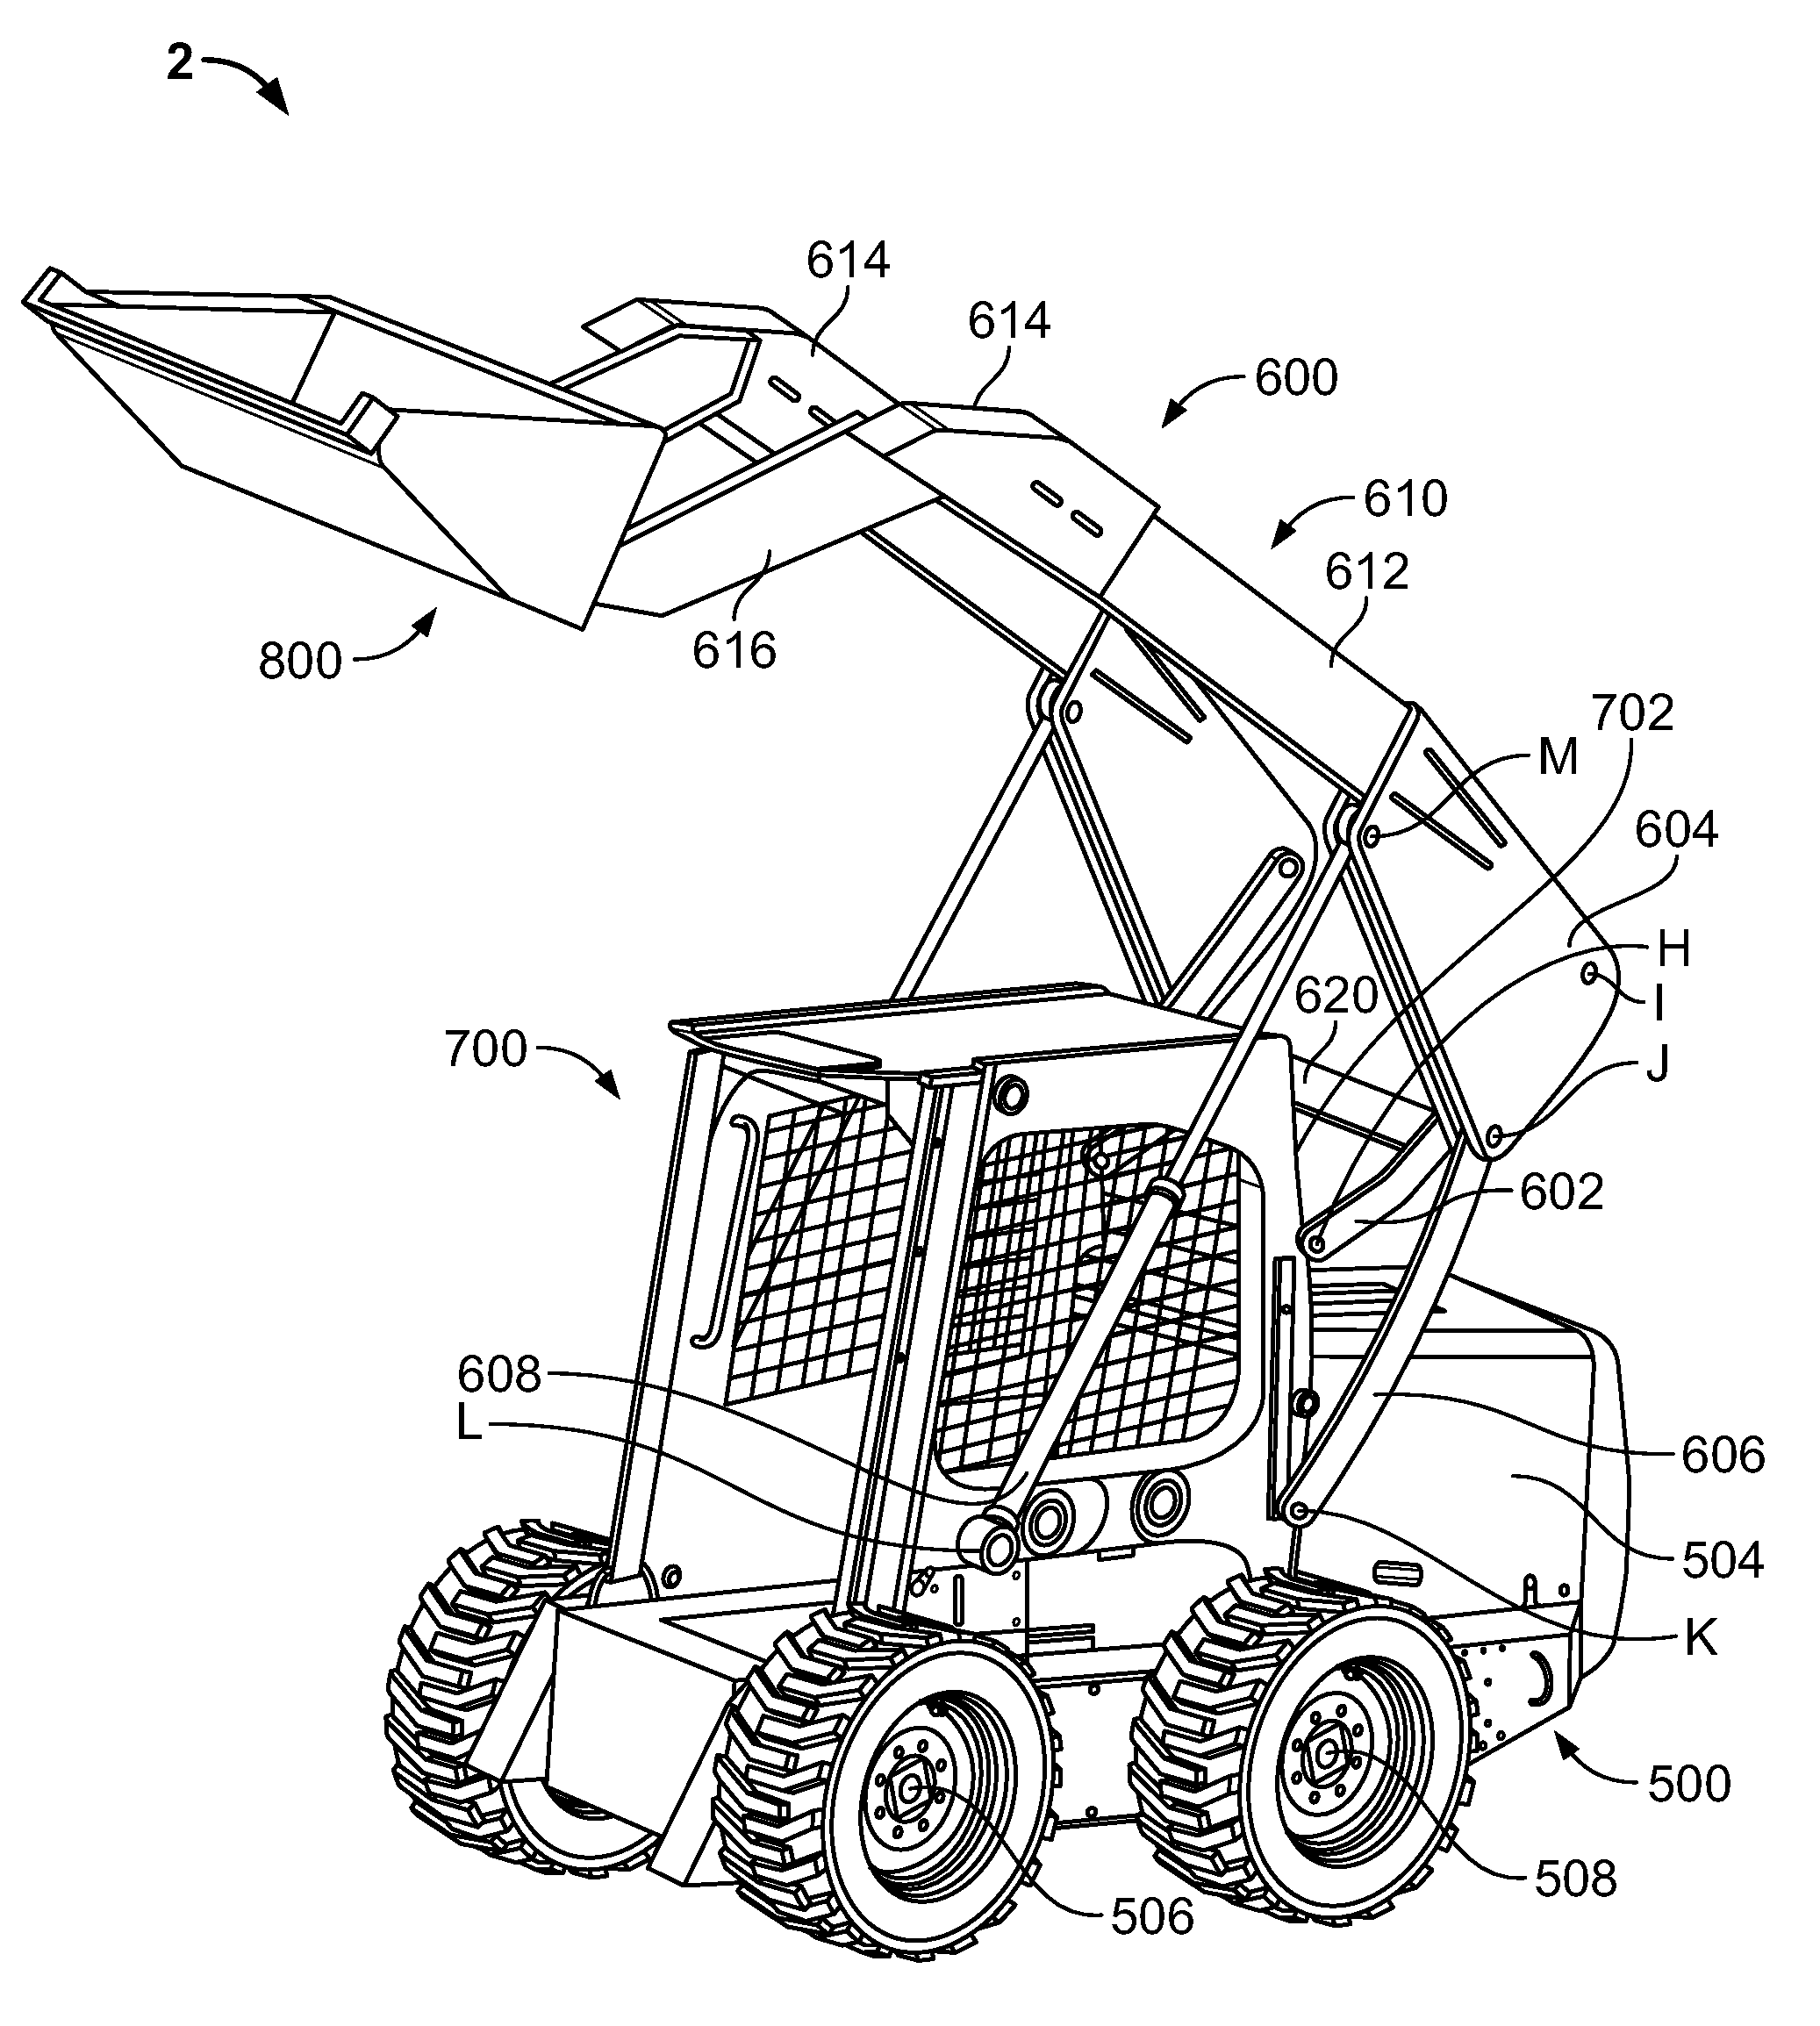 Vertical lift arm device